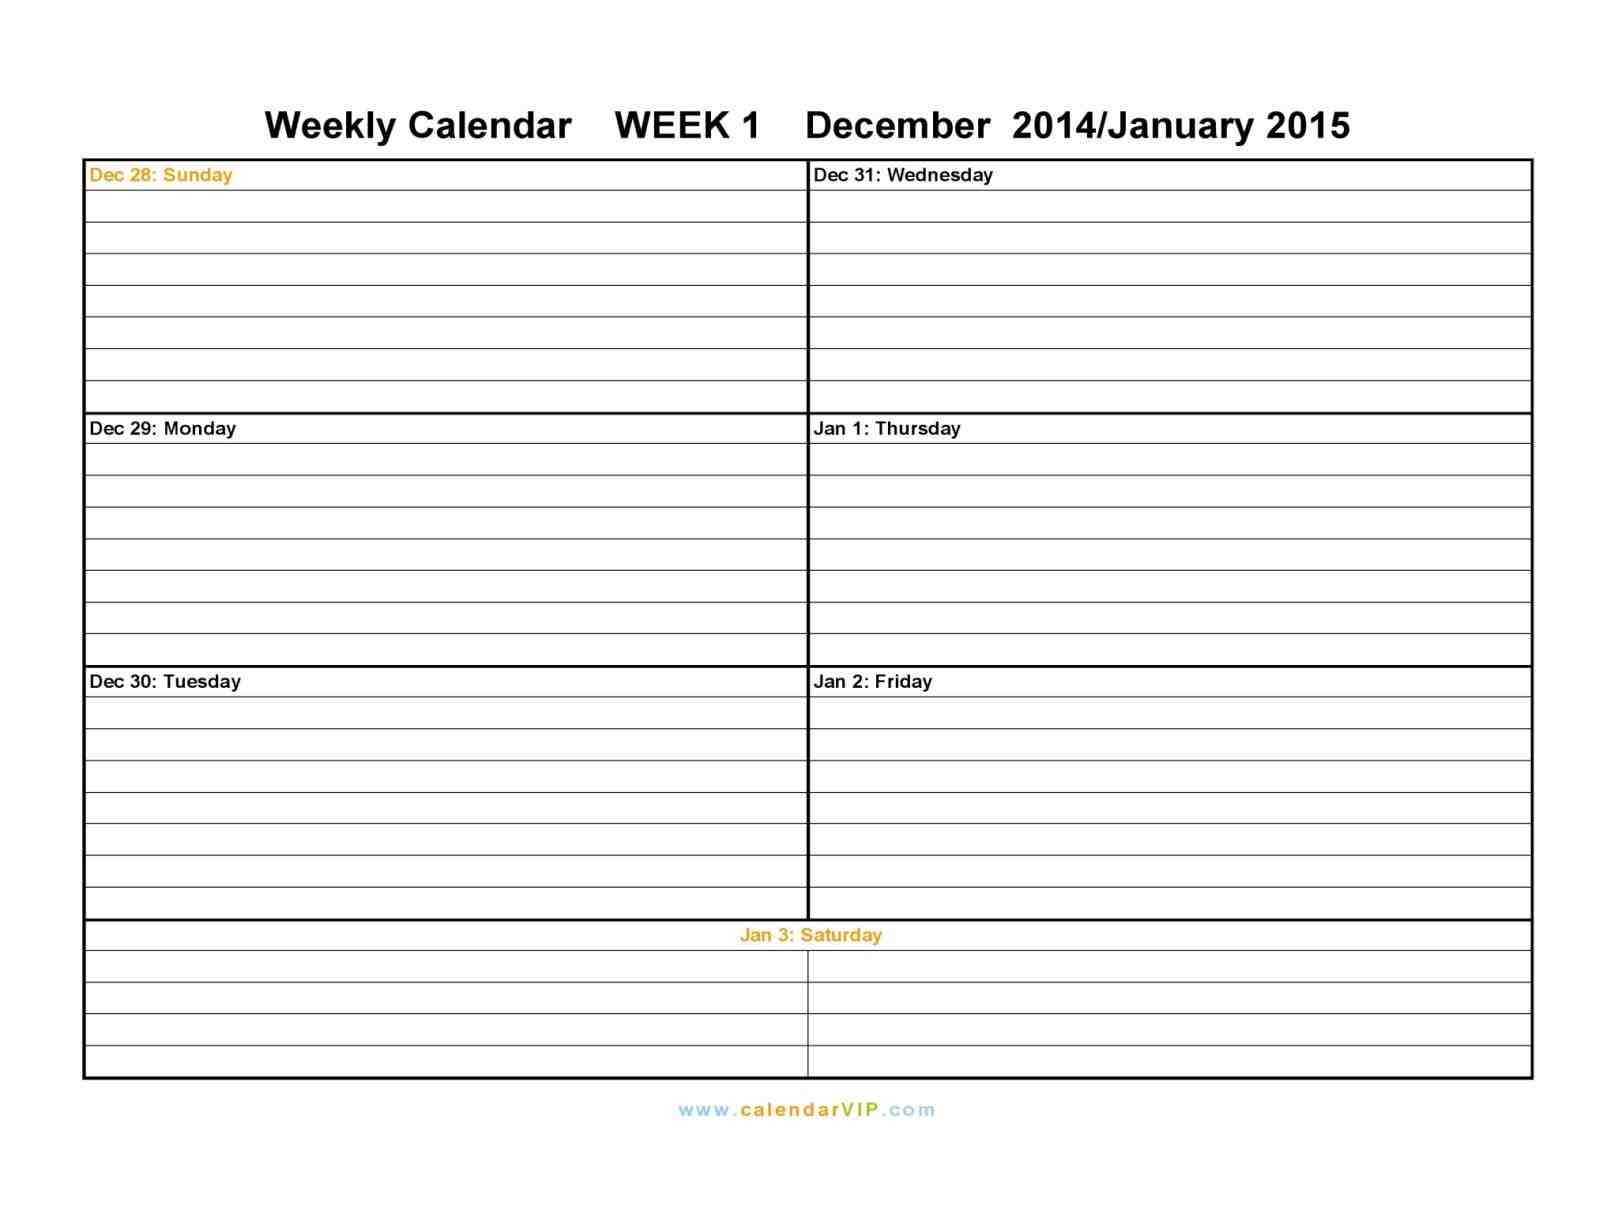 Daily Planner Online.Daily Planner Template 650×488